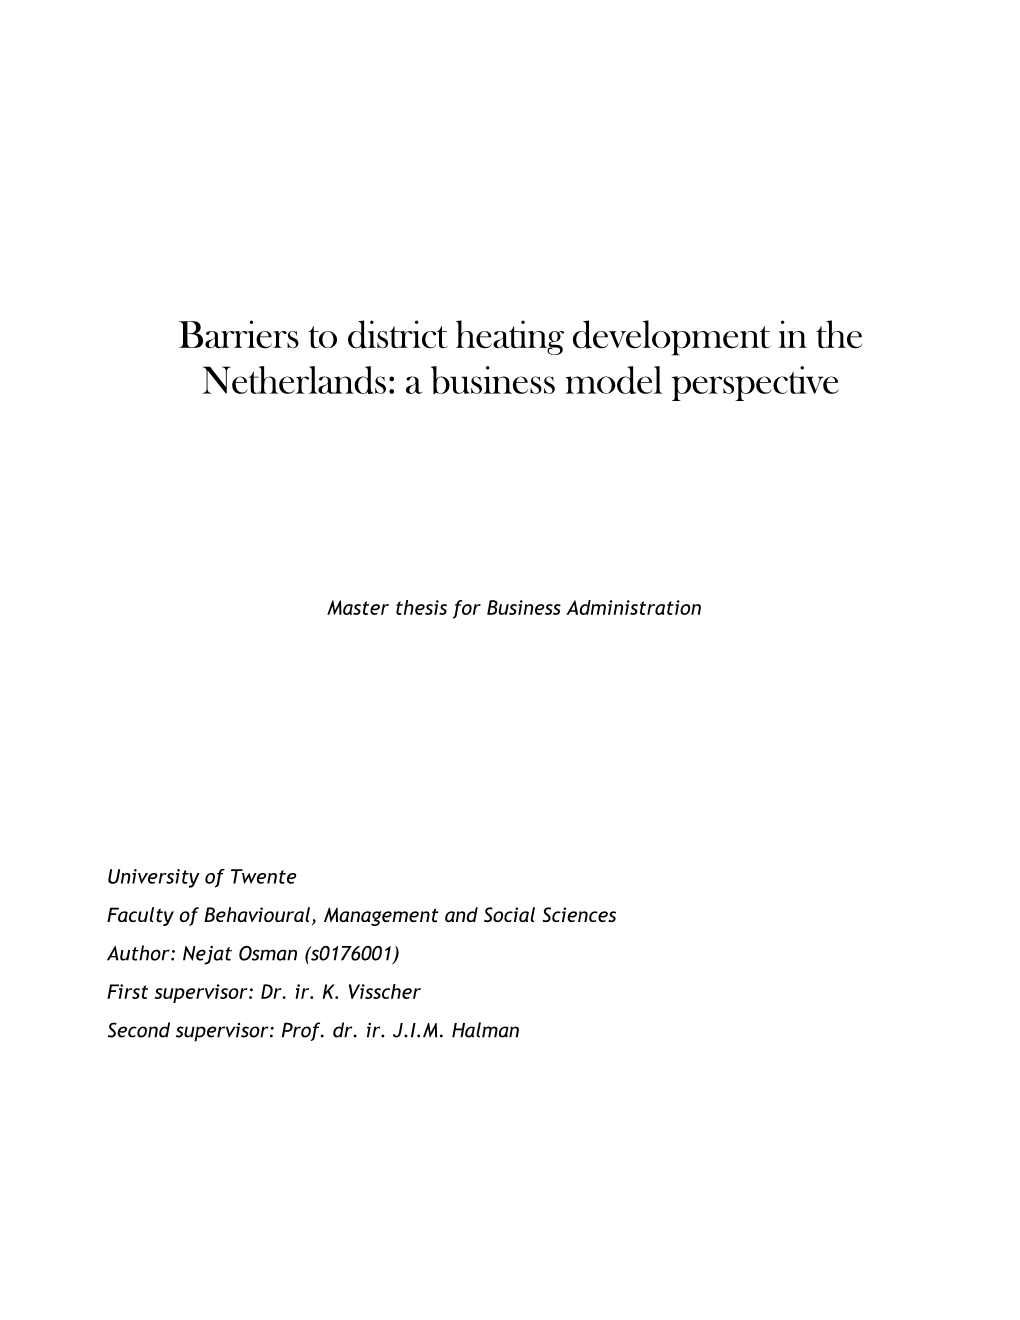 Barriers to District Heating Development in the Netherlands: a Business Model Perspective